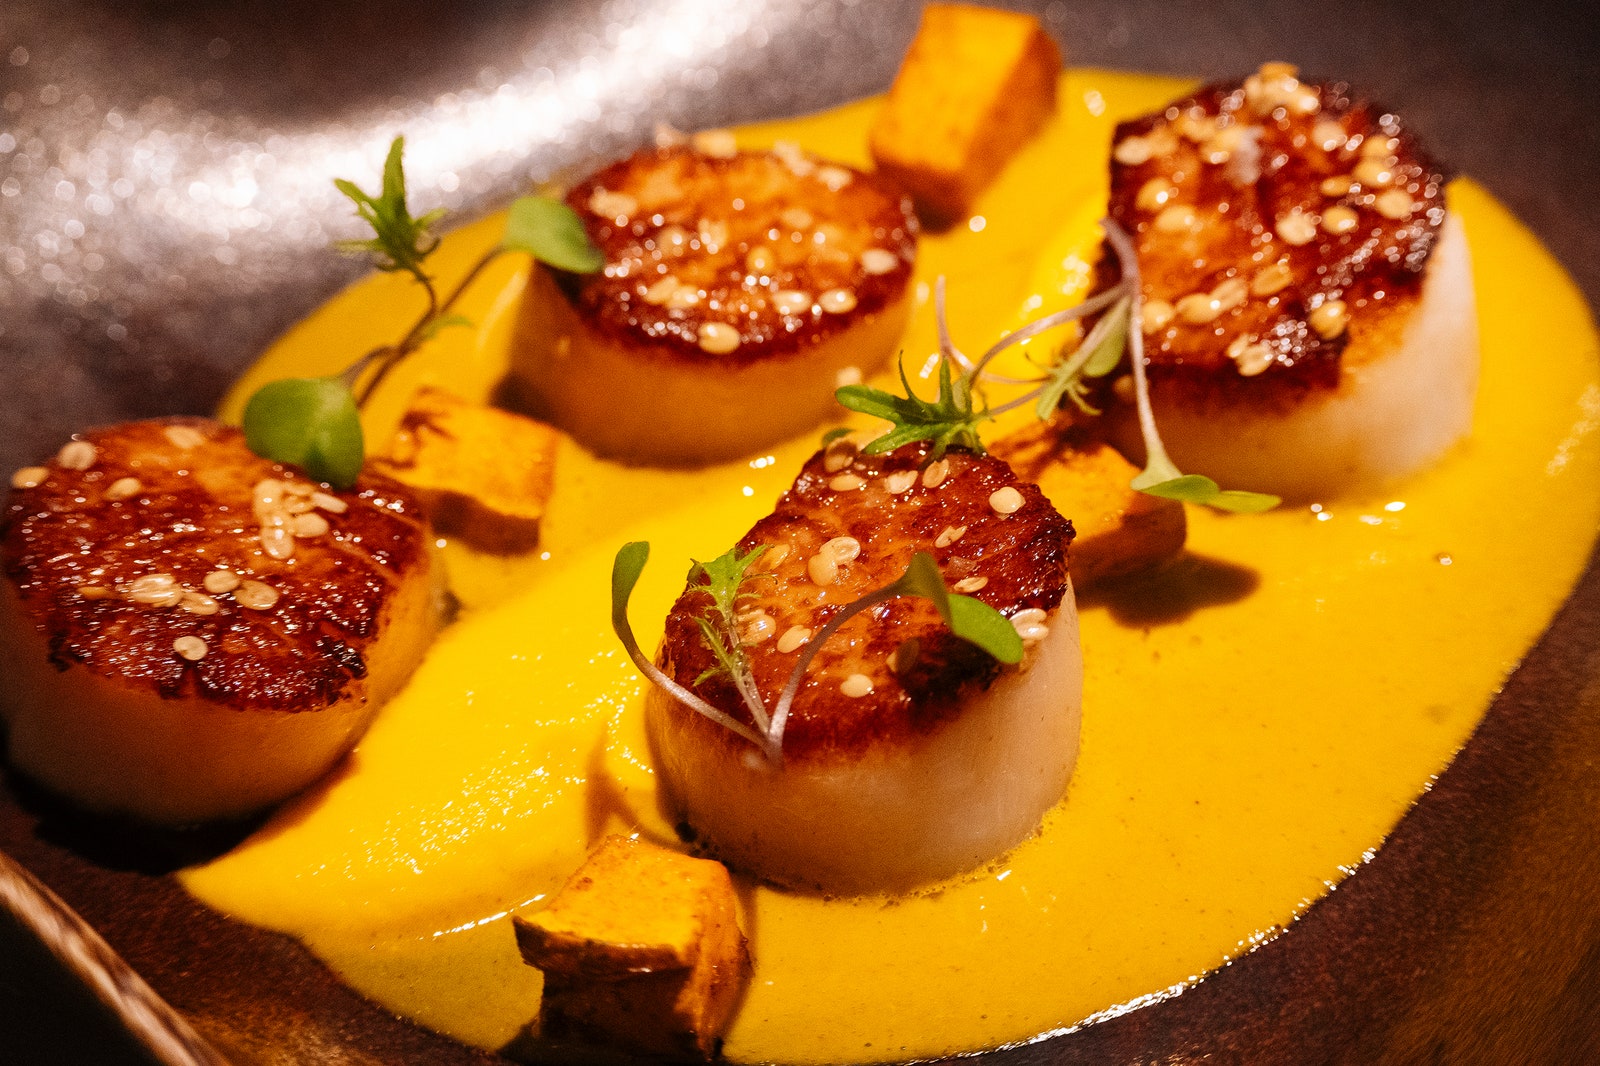 Scallops in a dish with a yelloworange sauce.